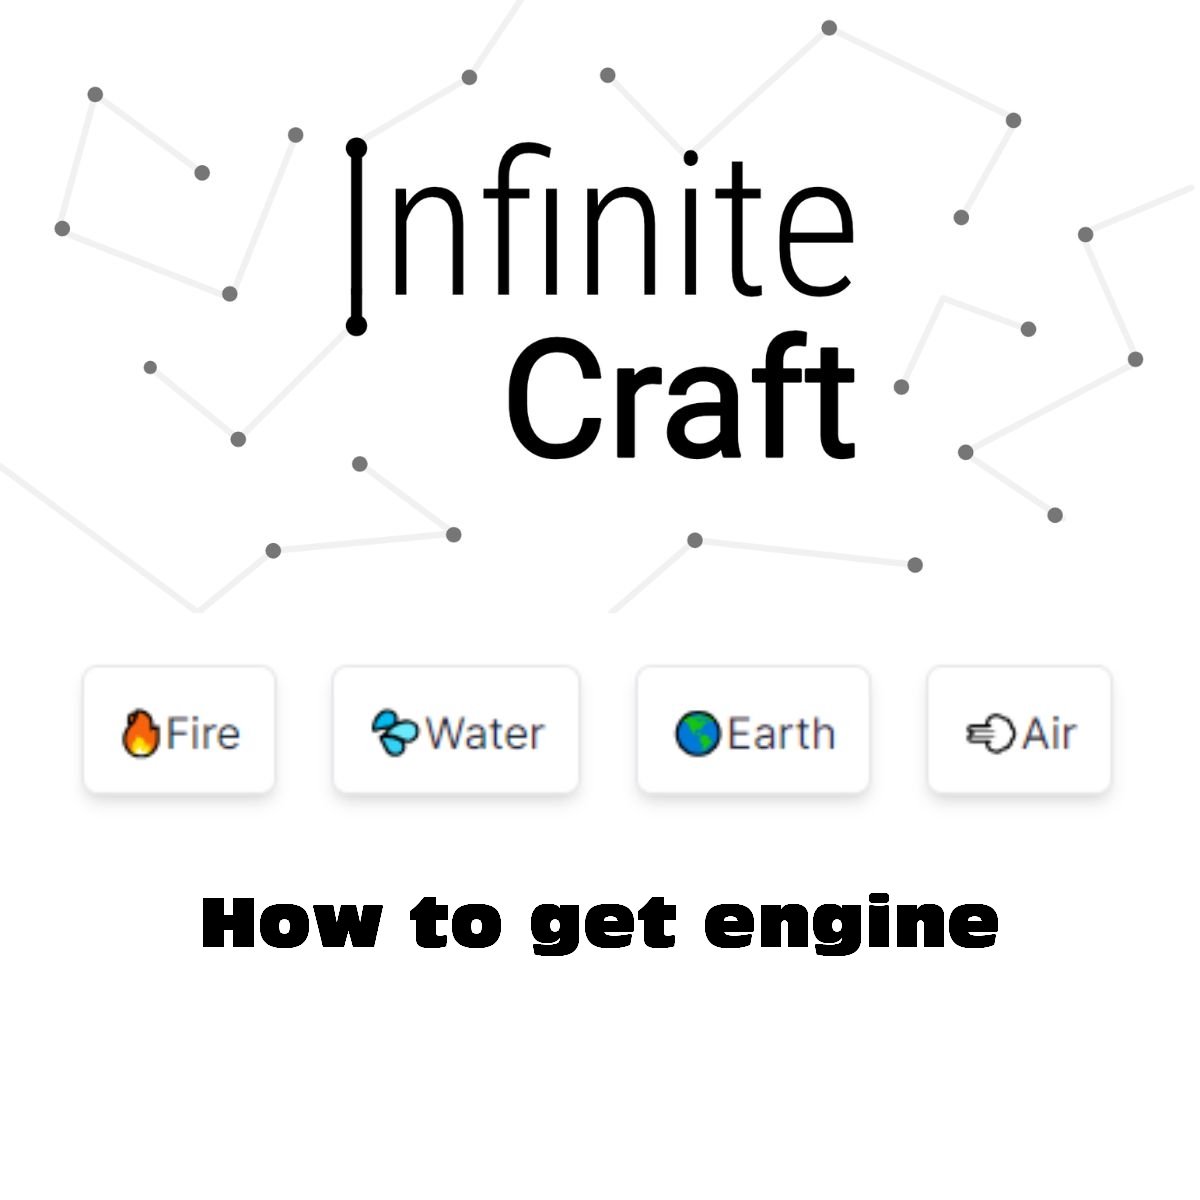 how to get engine in infinite craft